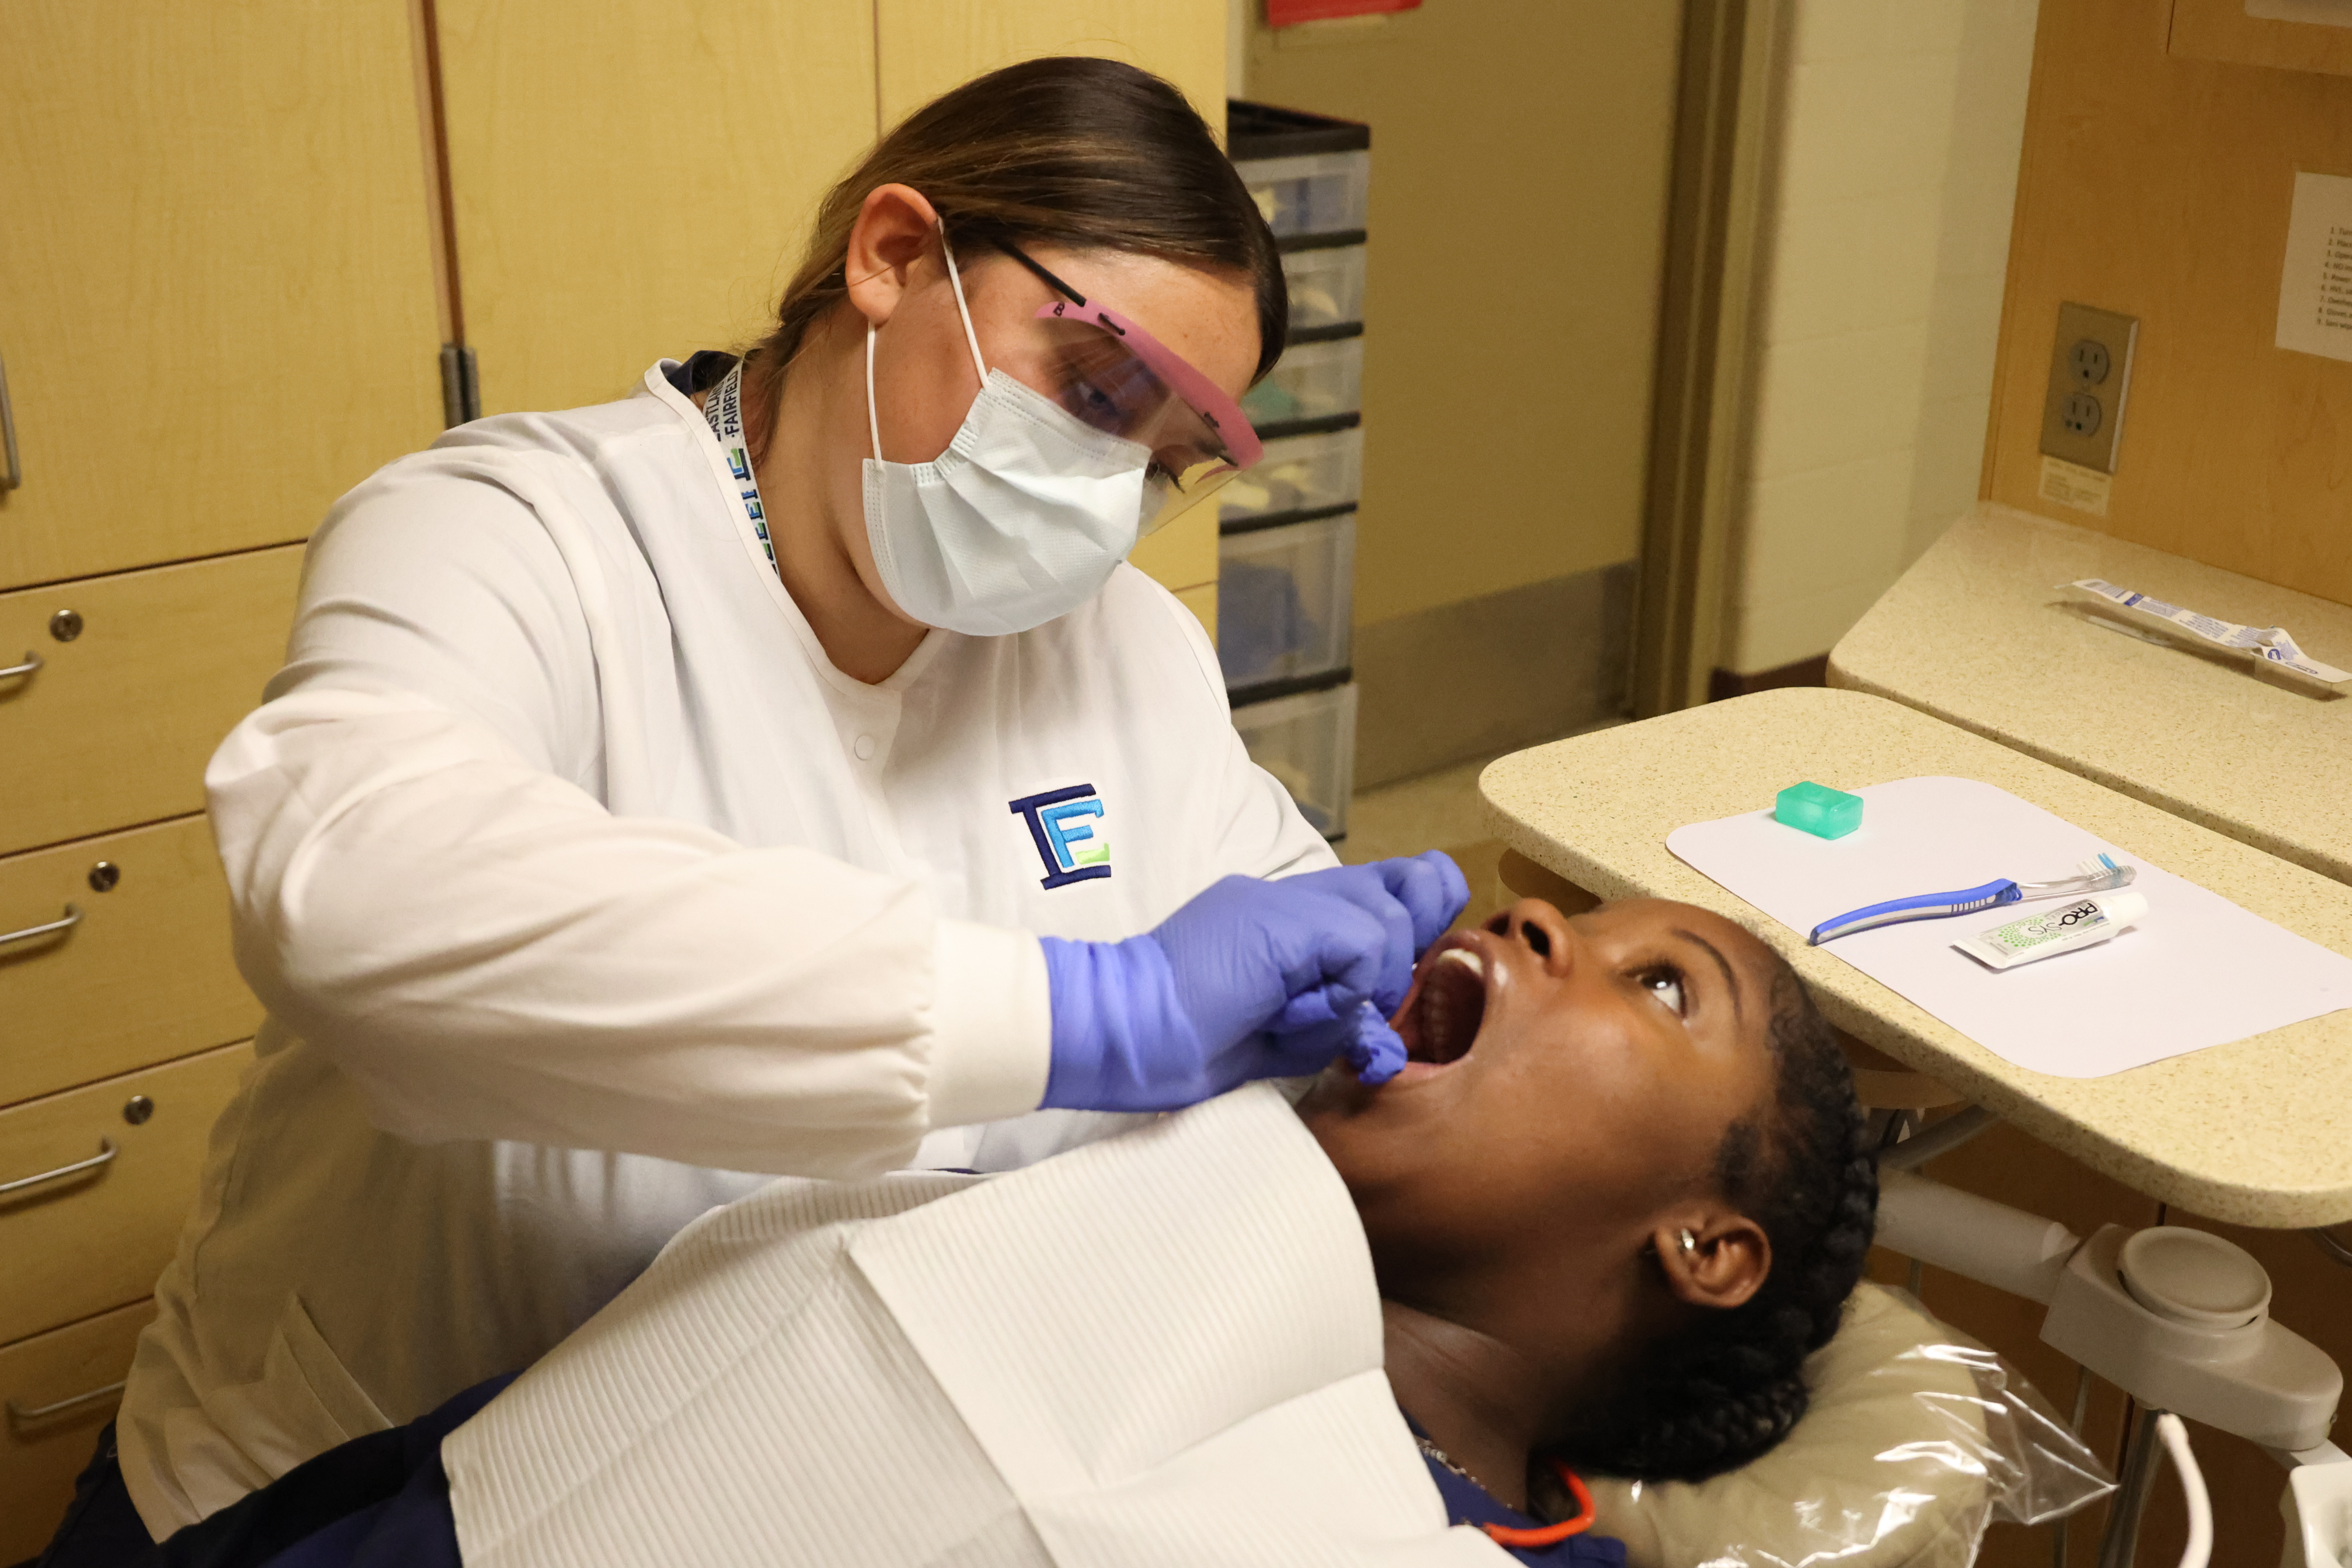 A student in a mask and safety glasses is cleaning another student's teeth in the lab.